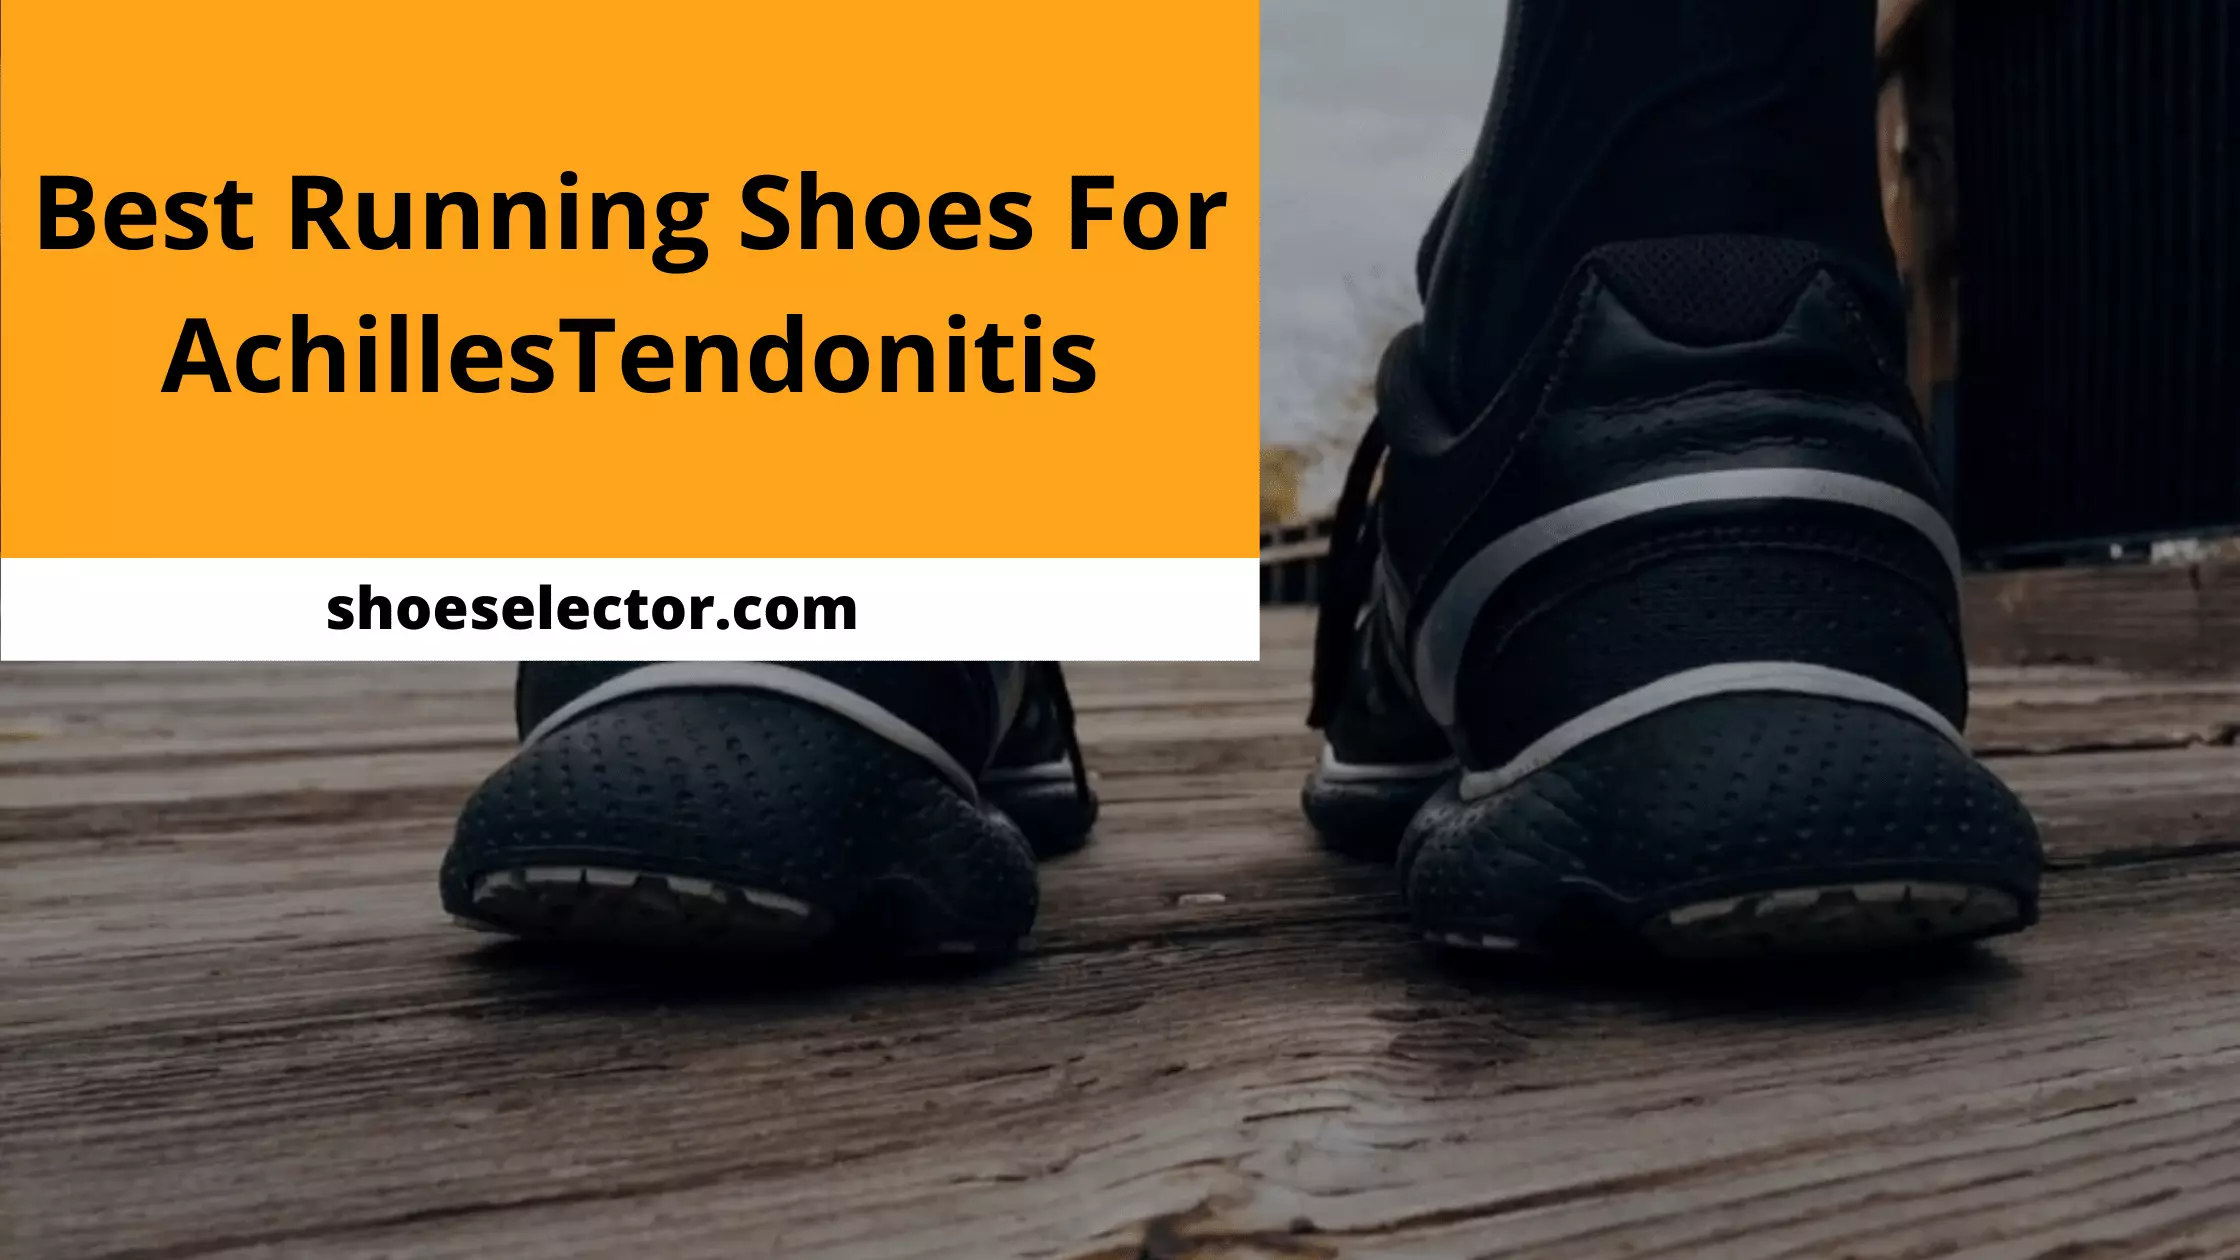 Best Running Shoes For Achilles Tendonitis - Complete Guide